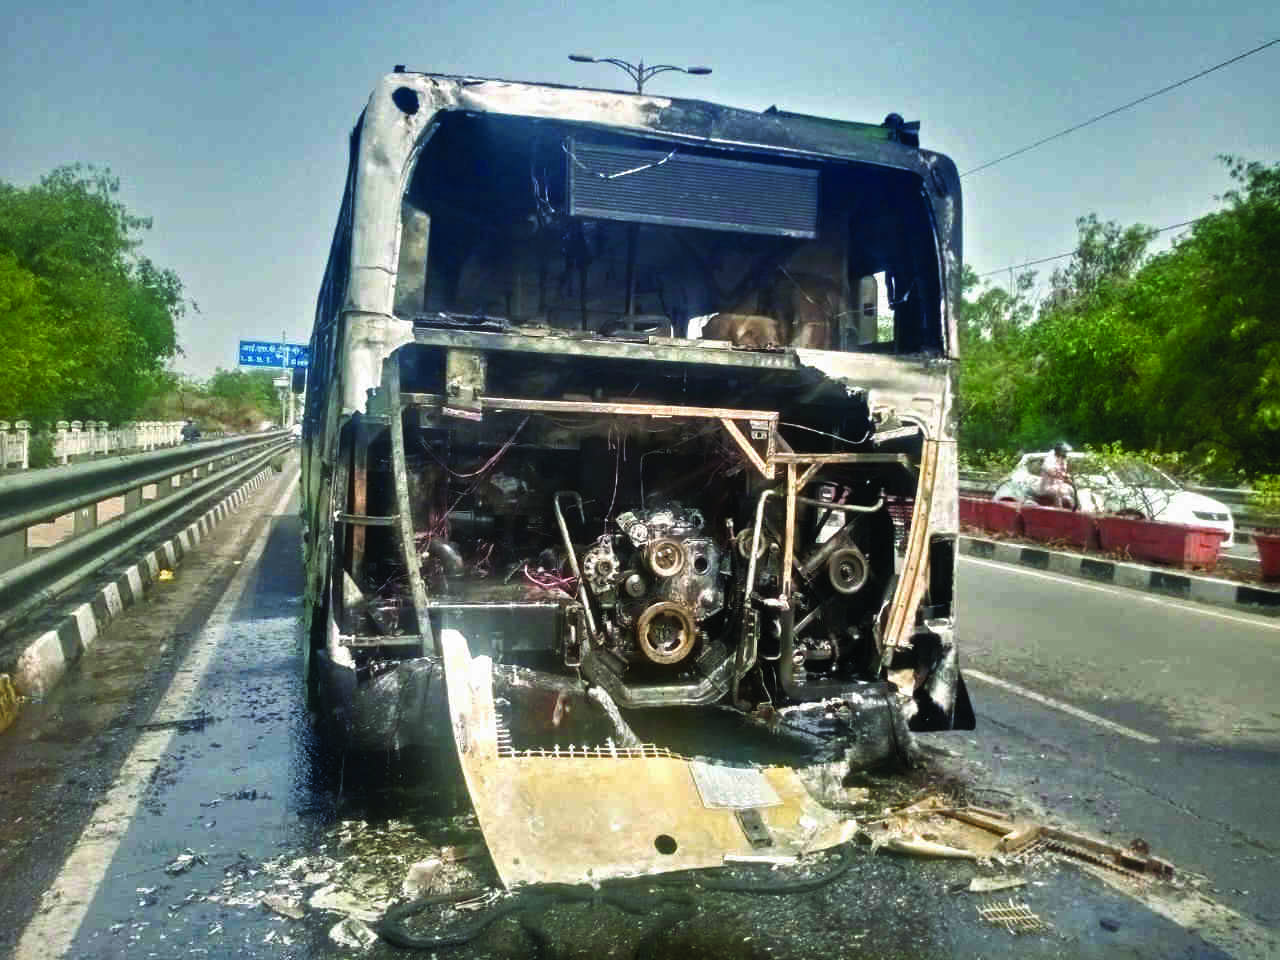 Another DTC bus on fire, fifth  such incident in last 2 months